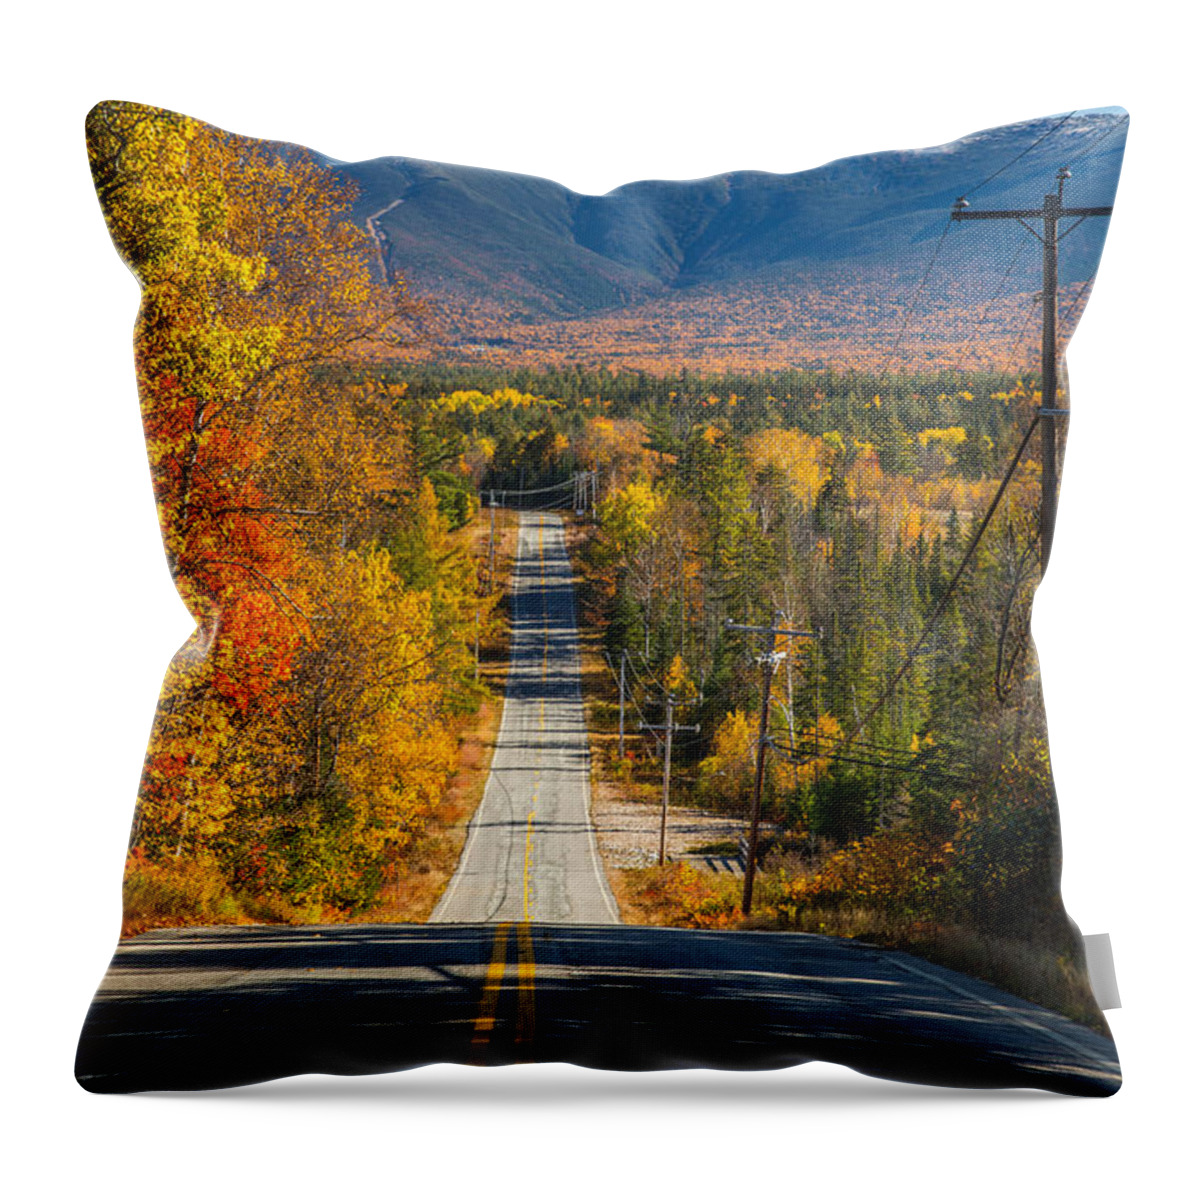 Autumn Throw Pillow featuring the photograph Autumn on the Base Road by White Mountain Images